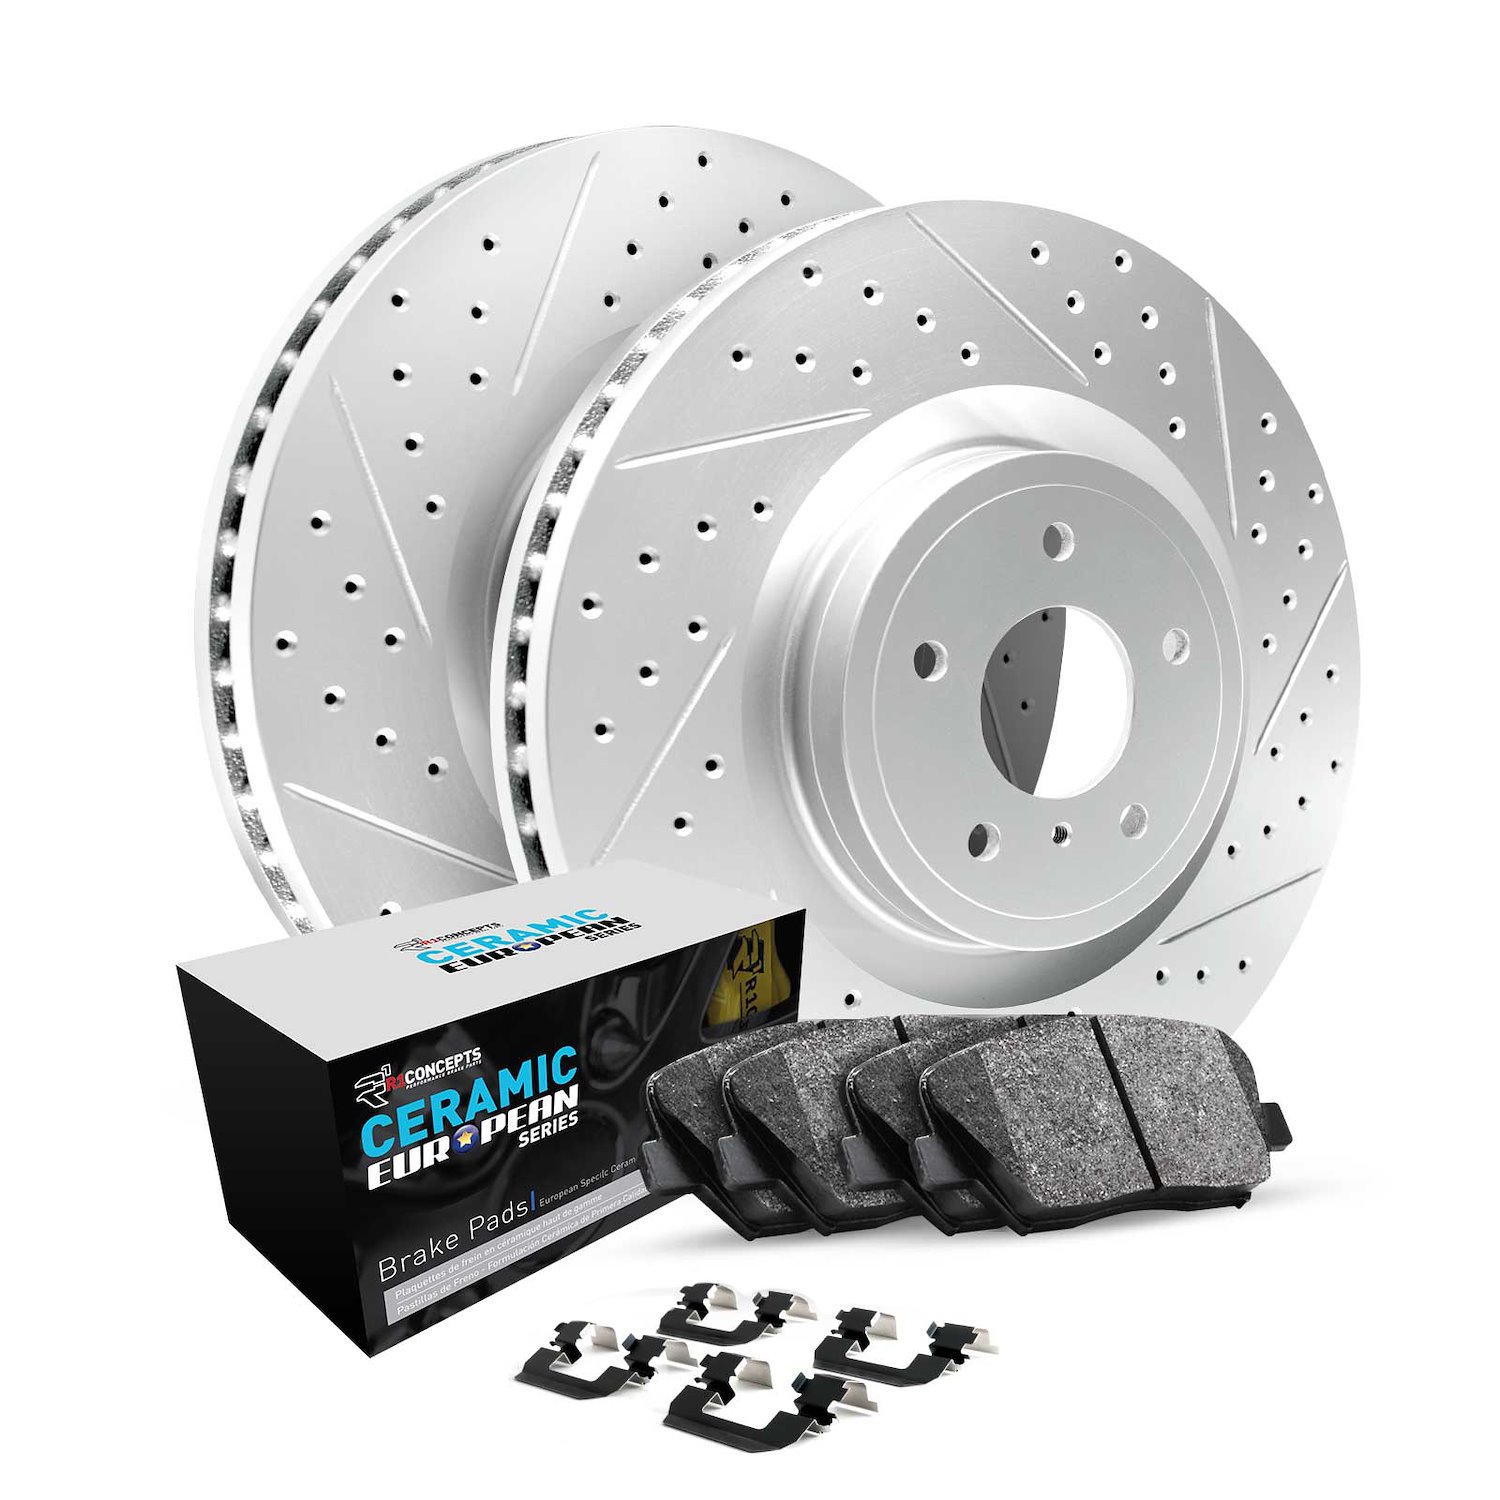 GEO-Carbon Drilled/Slotted Rotors w/Euro Ceramic Pads/Hardware, 1998-2009 Fits Multiple Makes/Models, Position: Rear